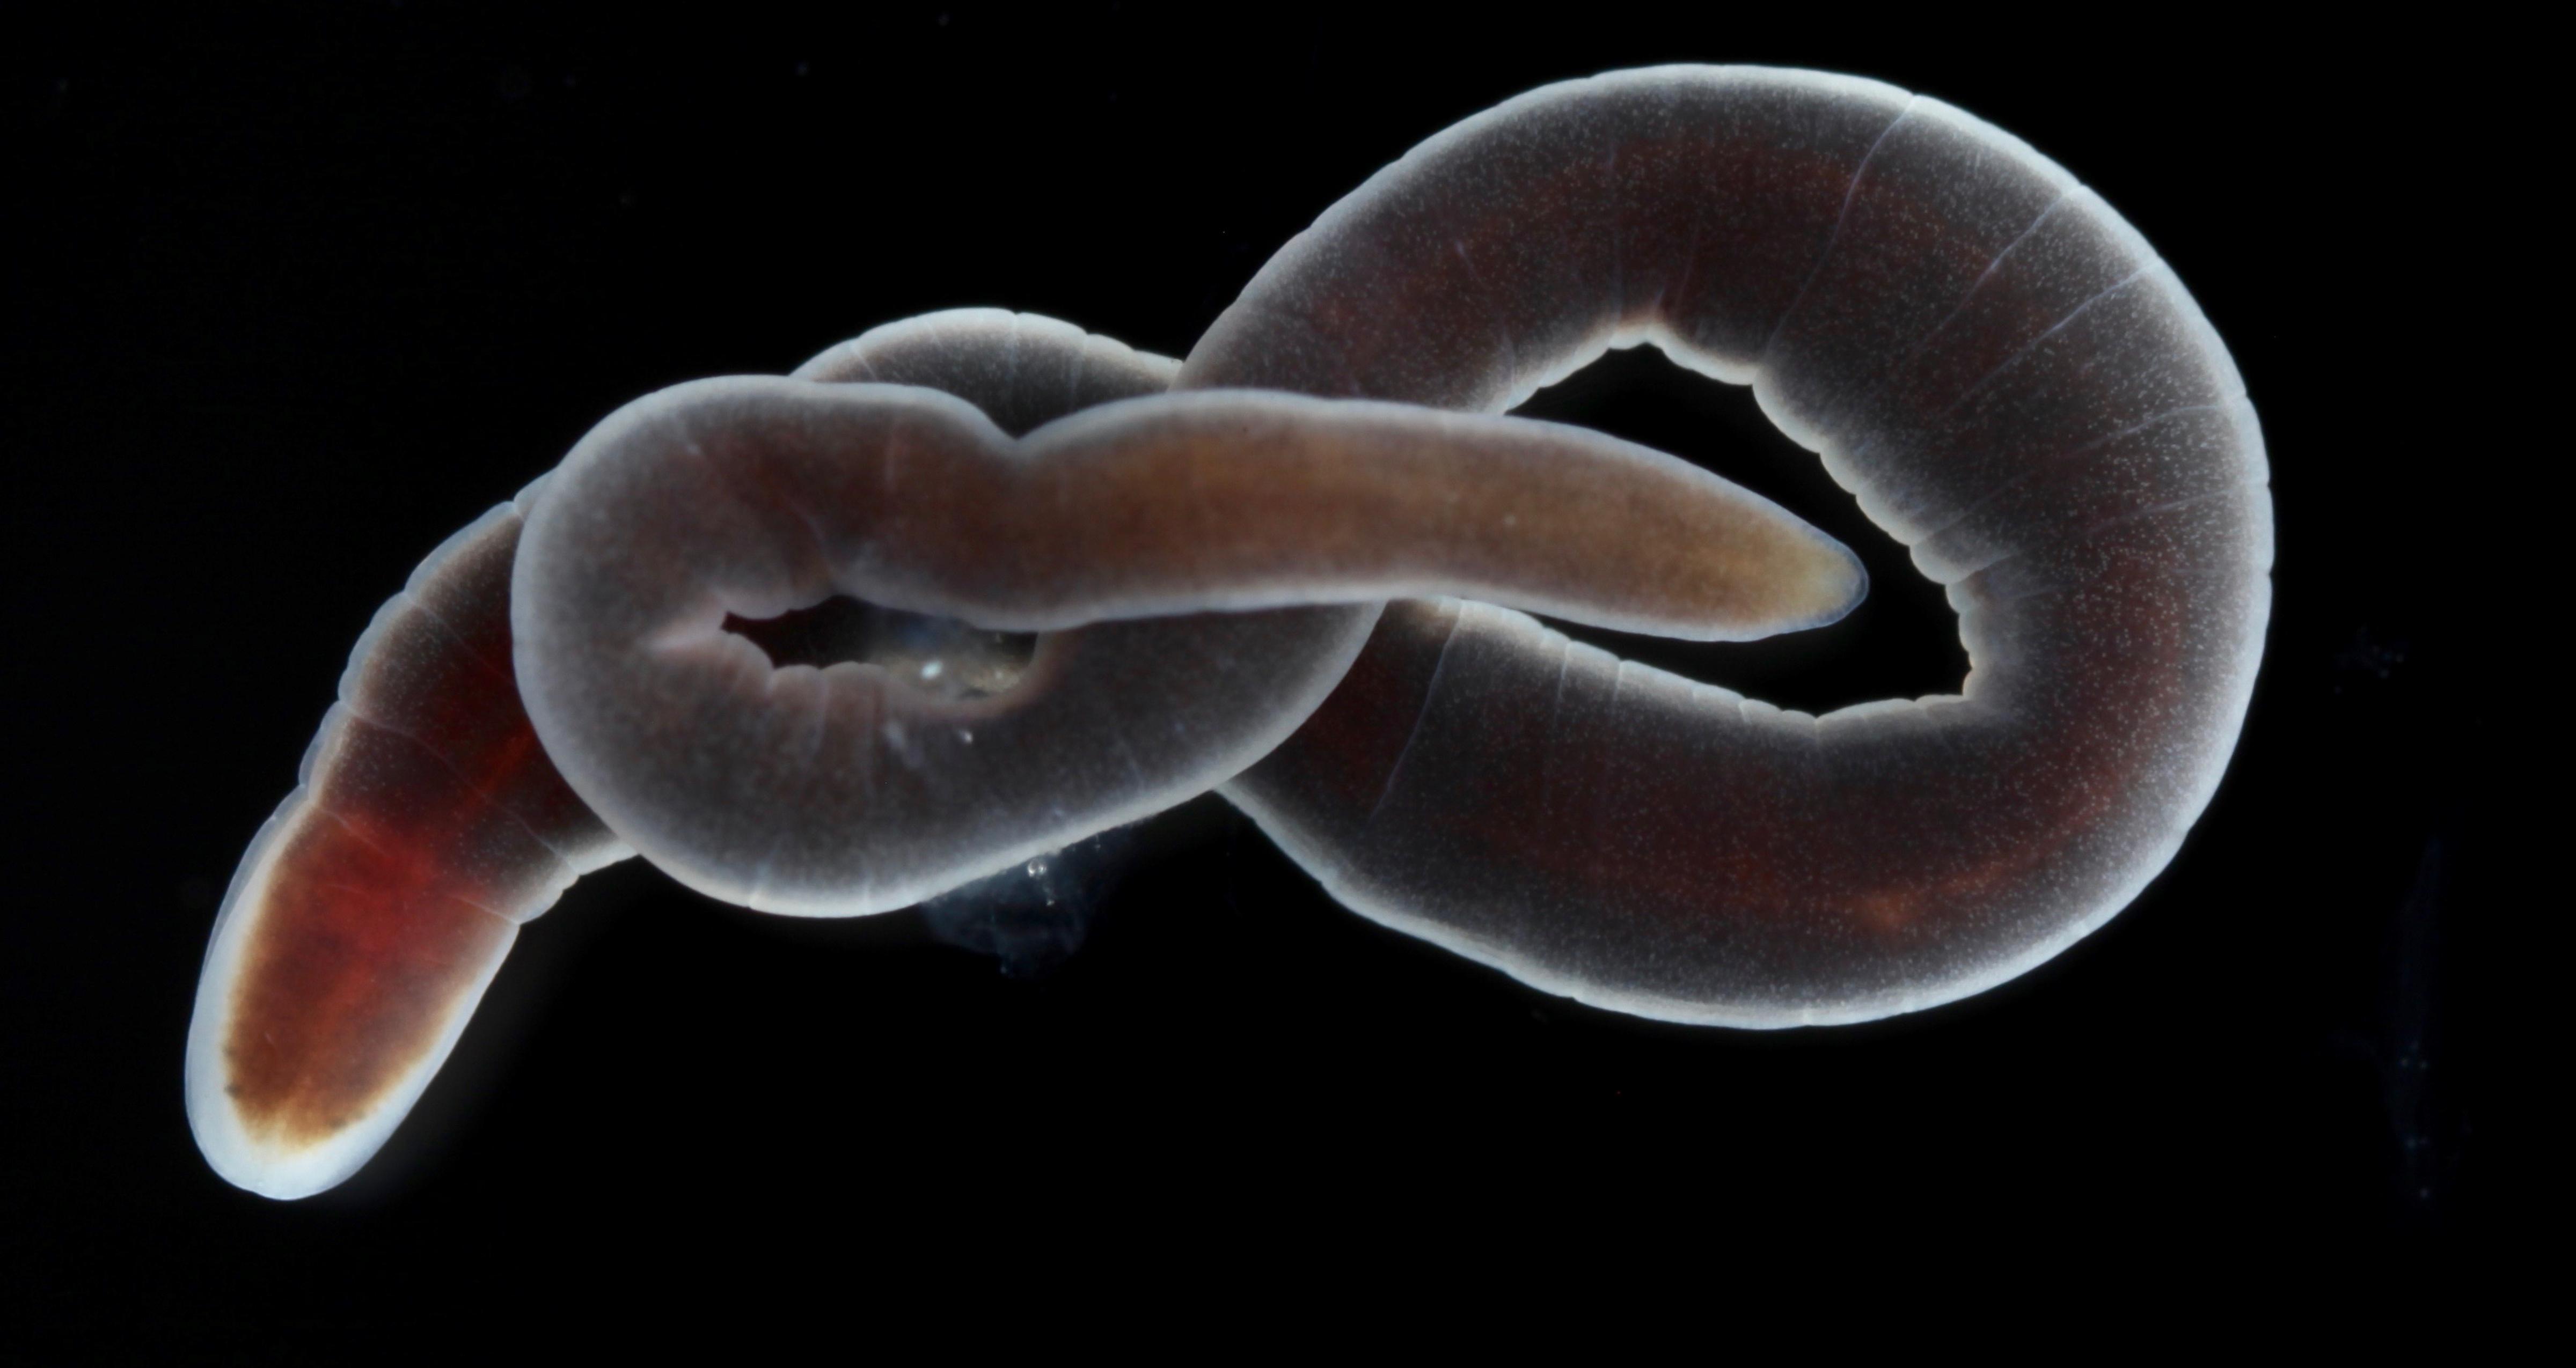 Lineus ruber: Its an adult ribbon worm (Slimormer in norwegian), Nemertean in latin. Its length is about 7 cm and from the rocky shore close to Bergen. They are dangerous predators - not for humans, but for other worms 